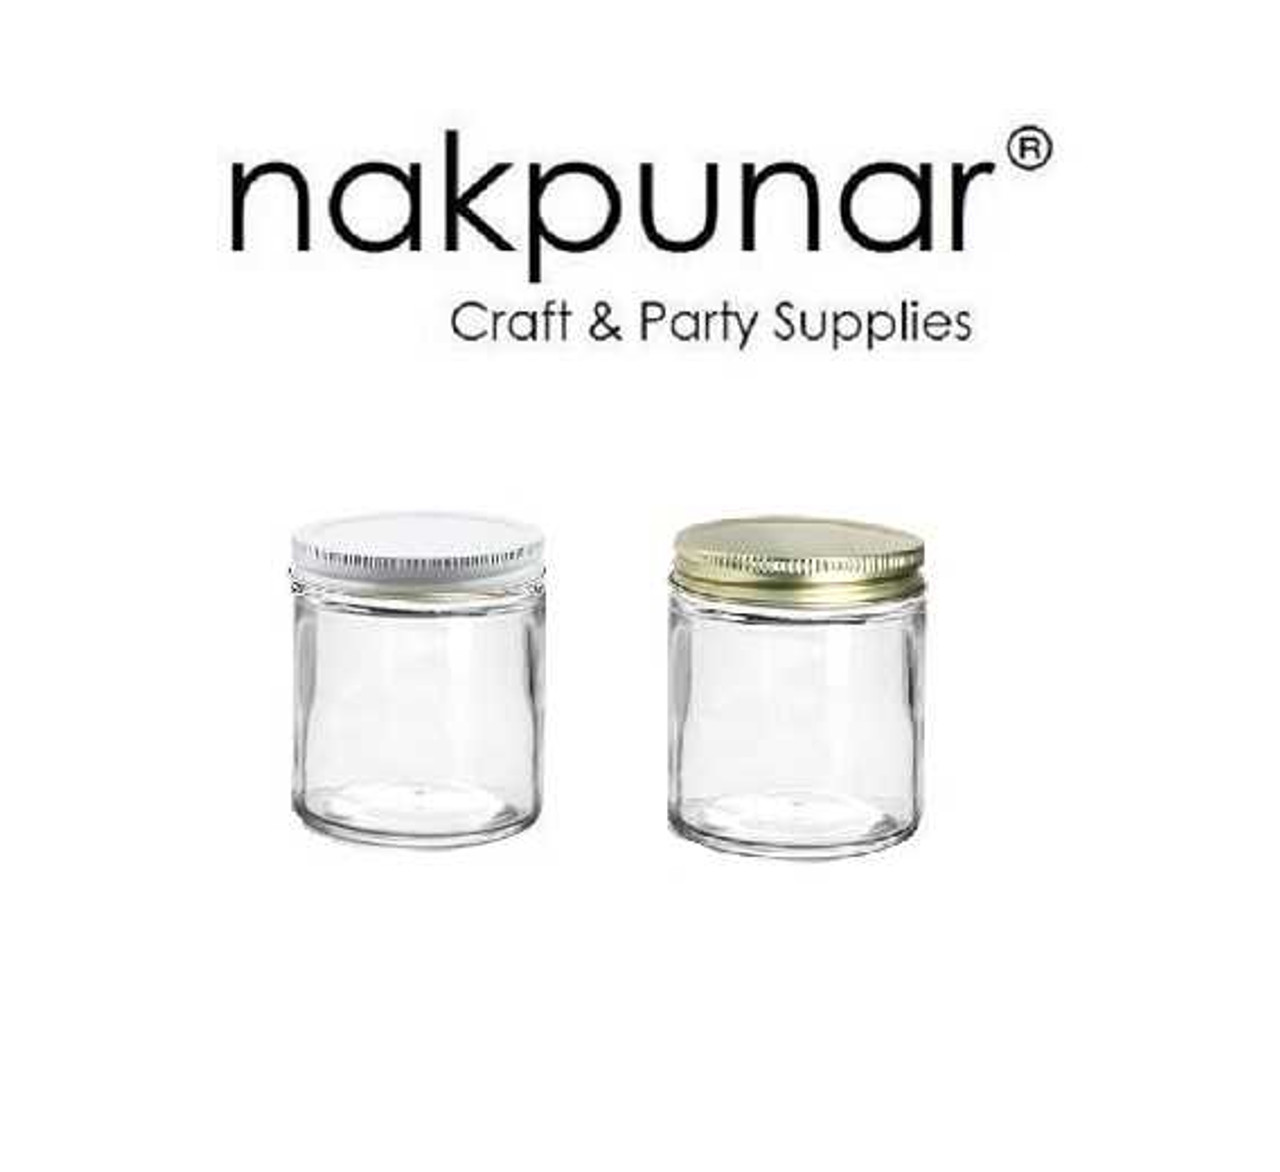  North Mountain Supply - SSC-2OZ-WT 2 Ounce Glass Straight Sided  Spice/Canning Jars - with 53mm White Lids - Case of 24 : Home & Kitchen